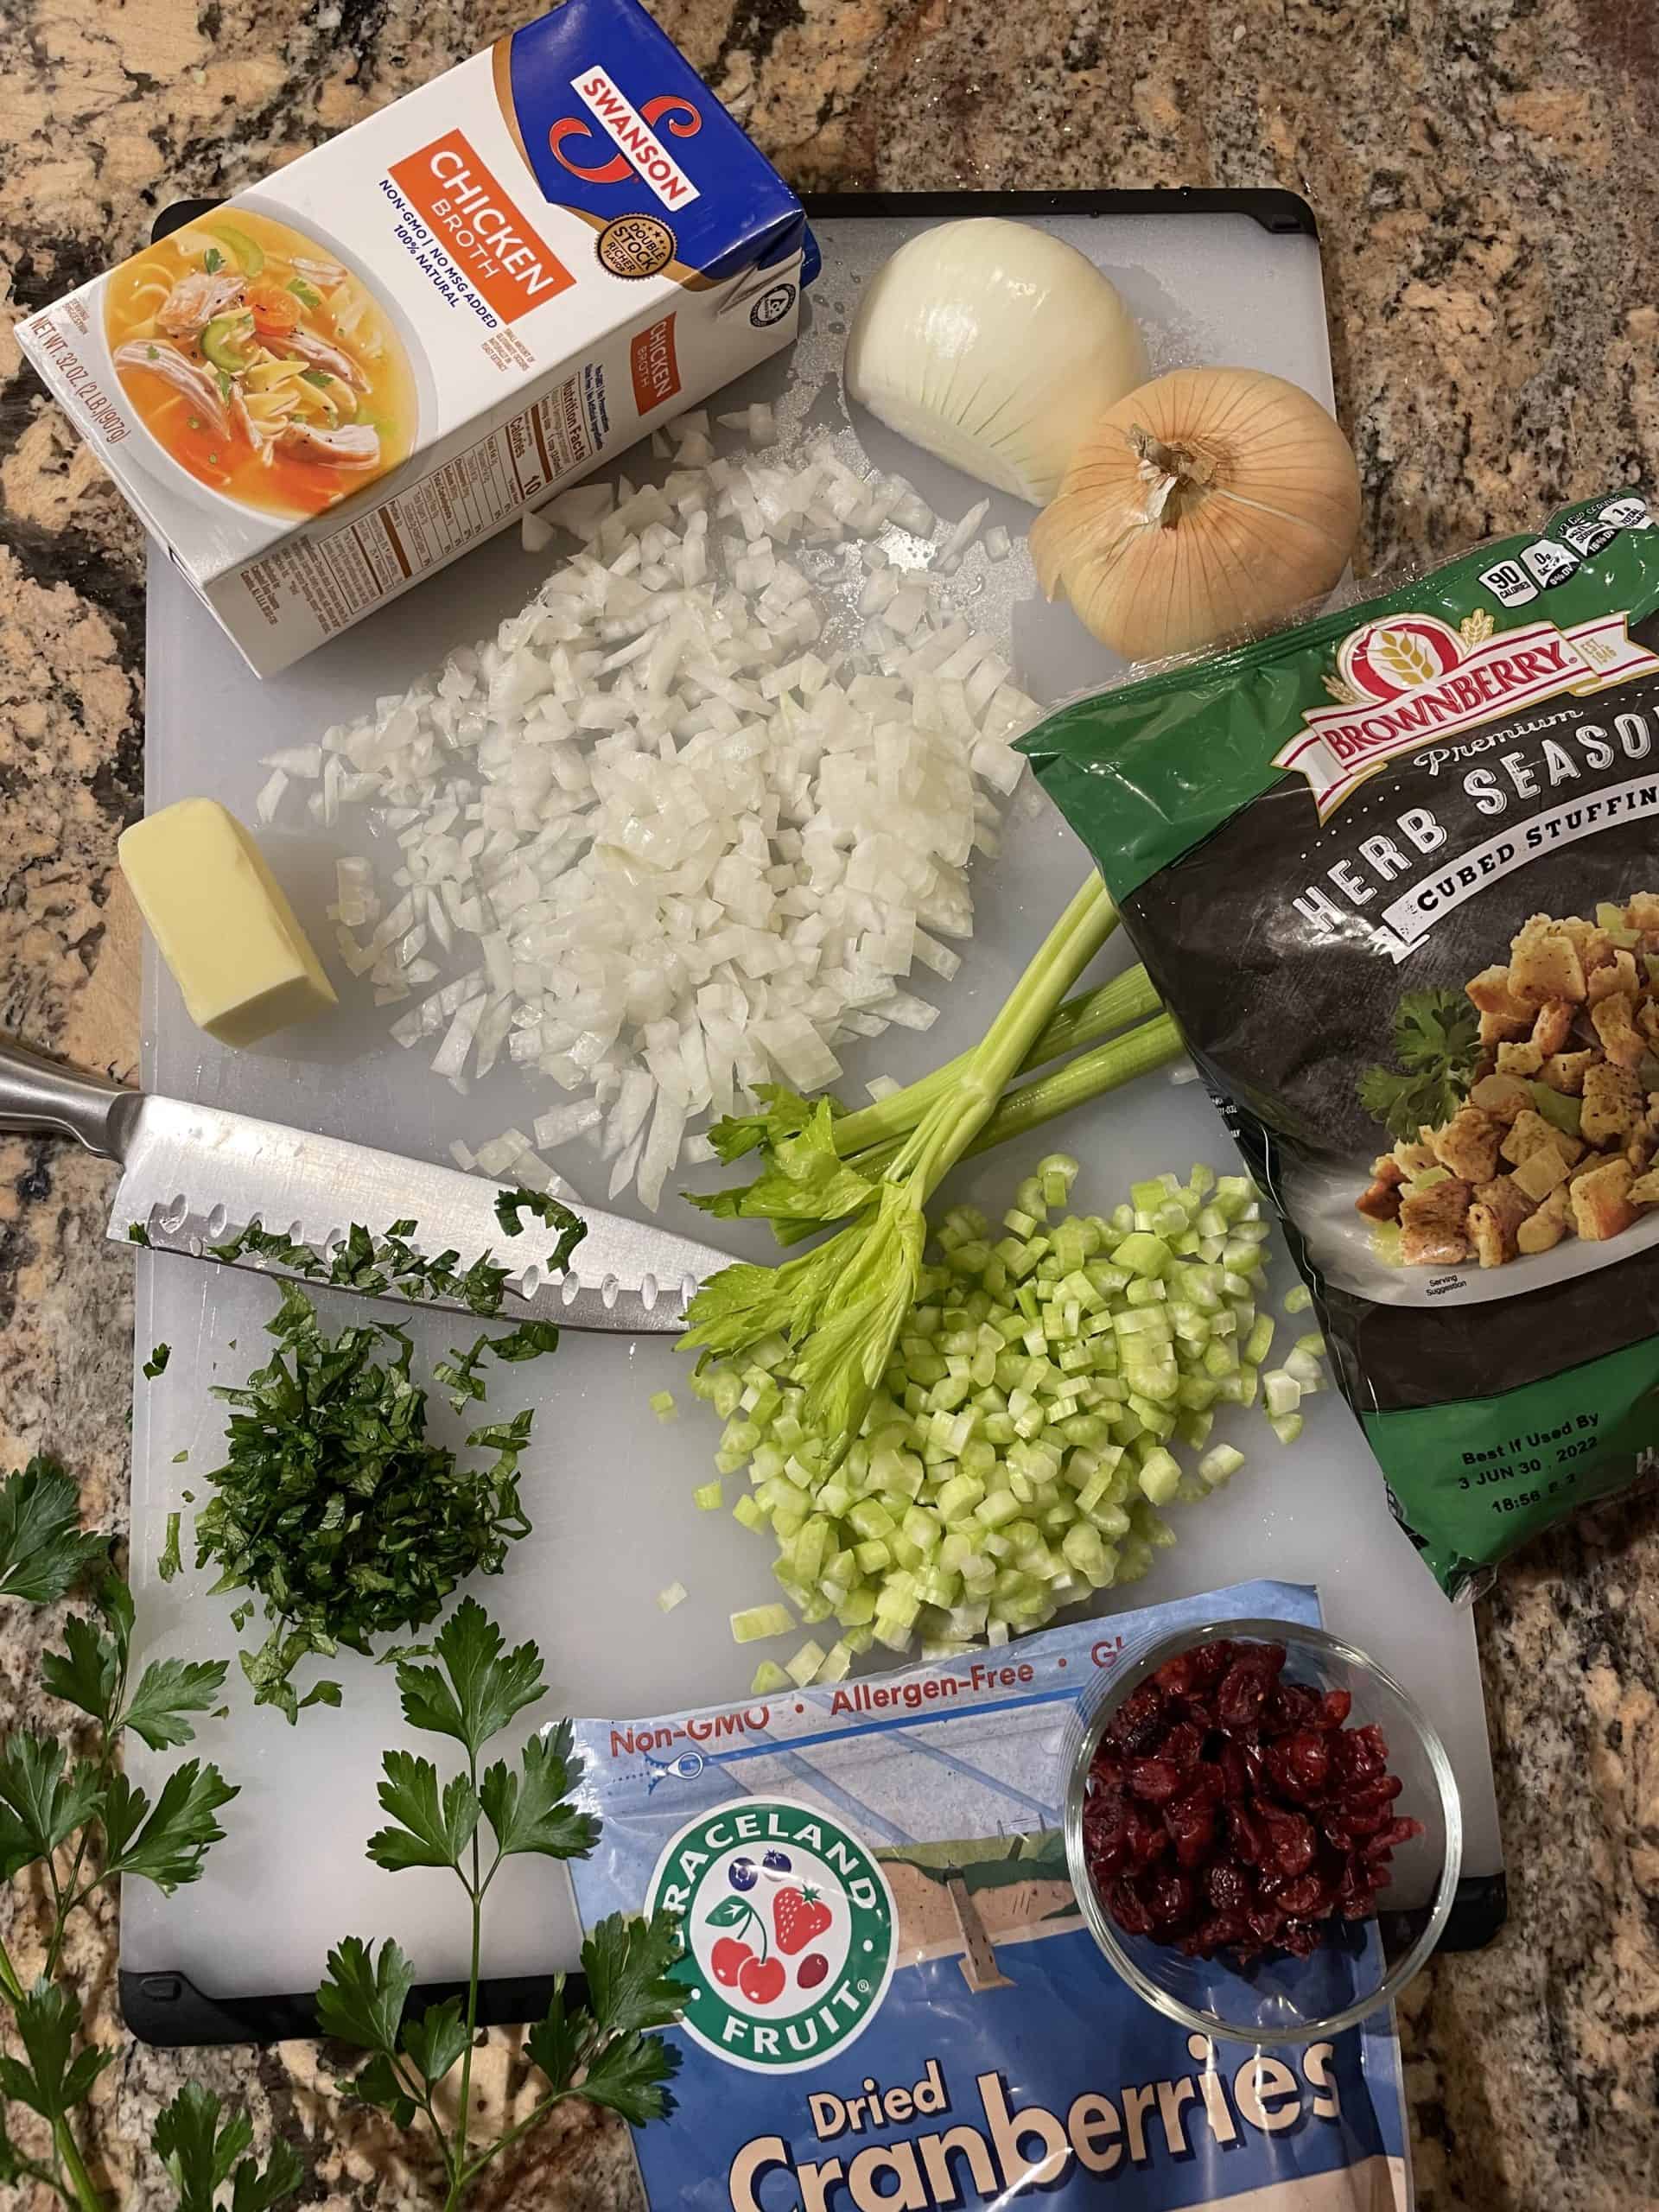 Traditional Stuffing Recipe Ingredients - diced celery, onion, broth, bag of stuffing mix, butter, fresh parsley, and dried cranberries. 